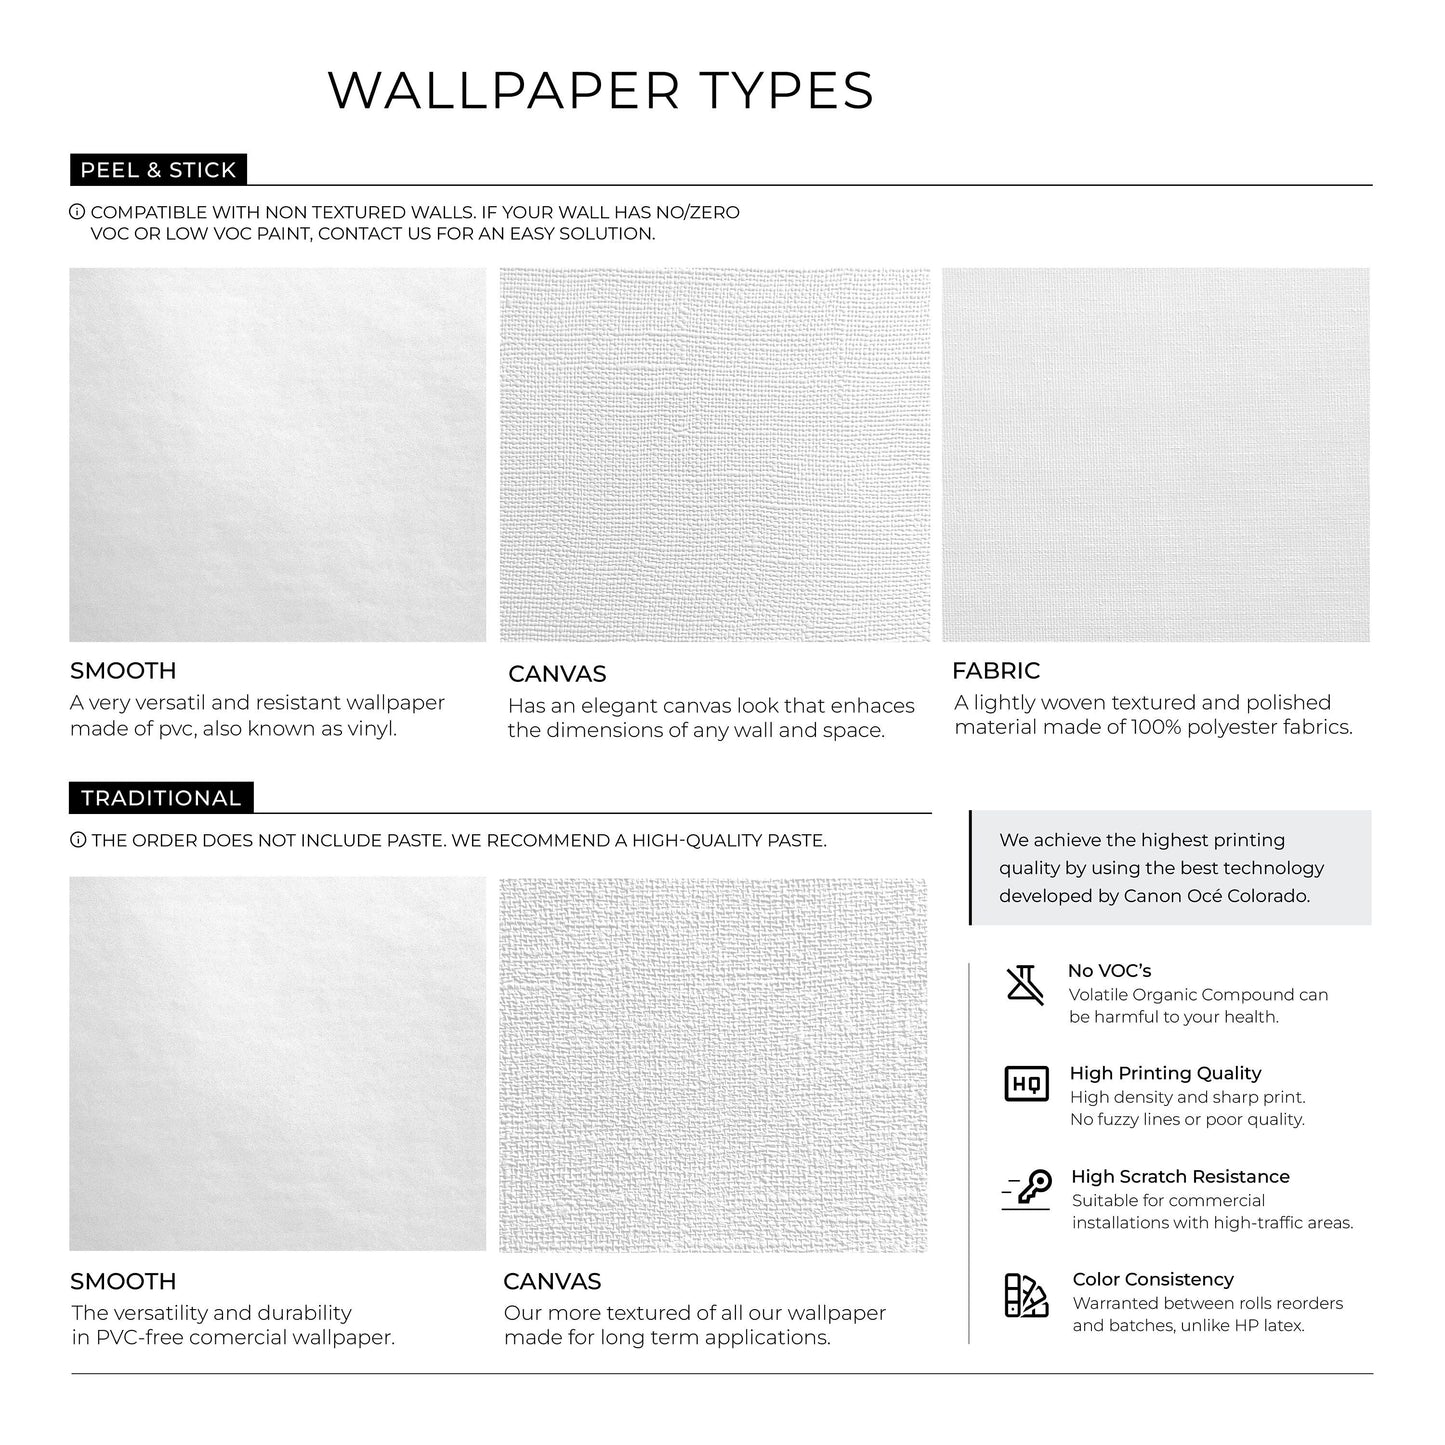 Removable Wallpaper, Temporary Wallpaper, Minimalistic Wallpaper, Peel and Stick Wallpaper, Wall Paper - A045